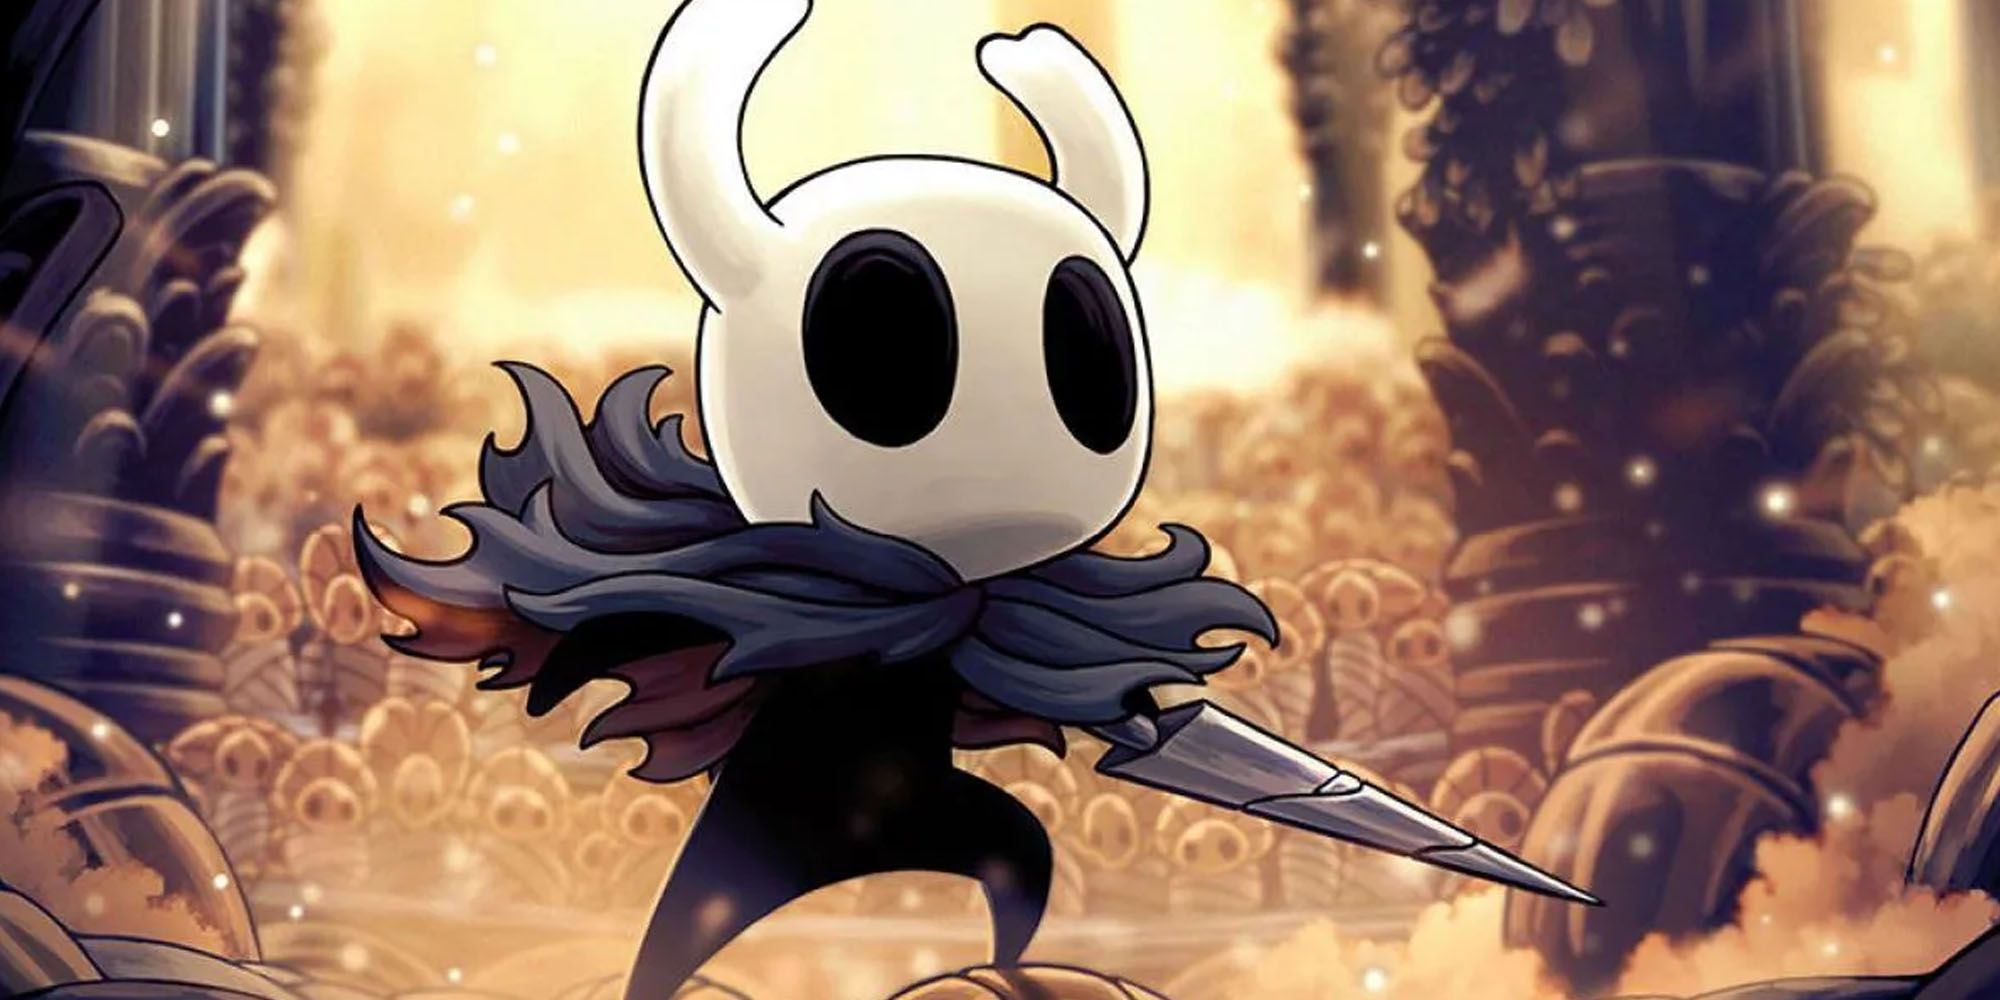 5. Hollow Knight: All Nail Art Locations and How to Unlock Them - wide 2